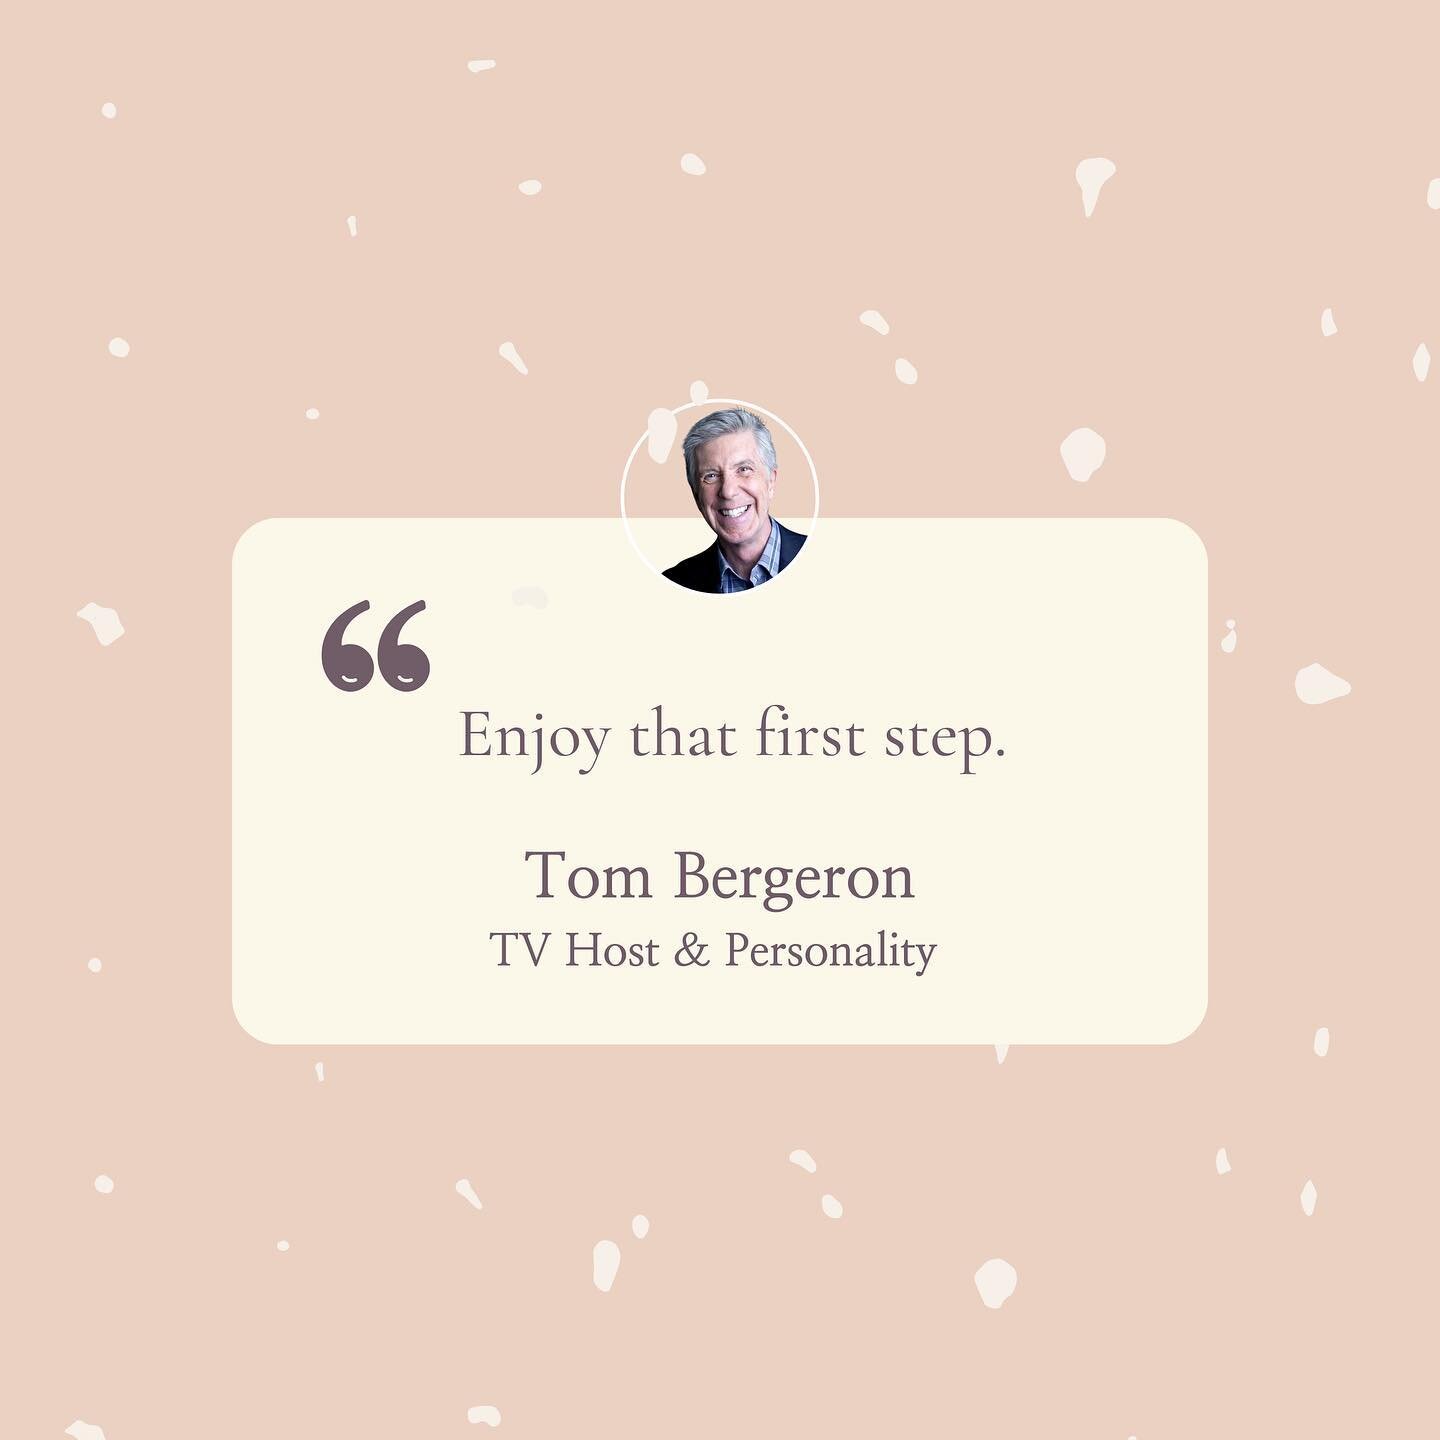 &ldquo;Enjoy that first step,&rdquo; @tombergeron 🥹🙌🏼

Every step you take, as an actor, is a memorable one. Even the steps that are the hardest. Just remember that you only ever experience that &ldquo;first time&rdquo; once 🤍

#firststep #tomber